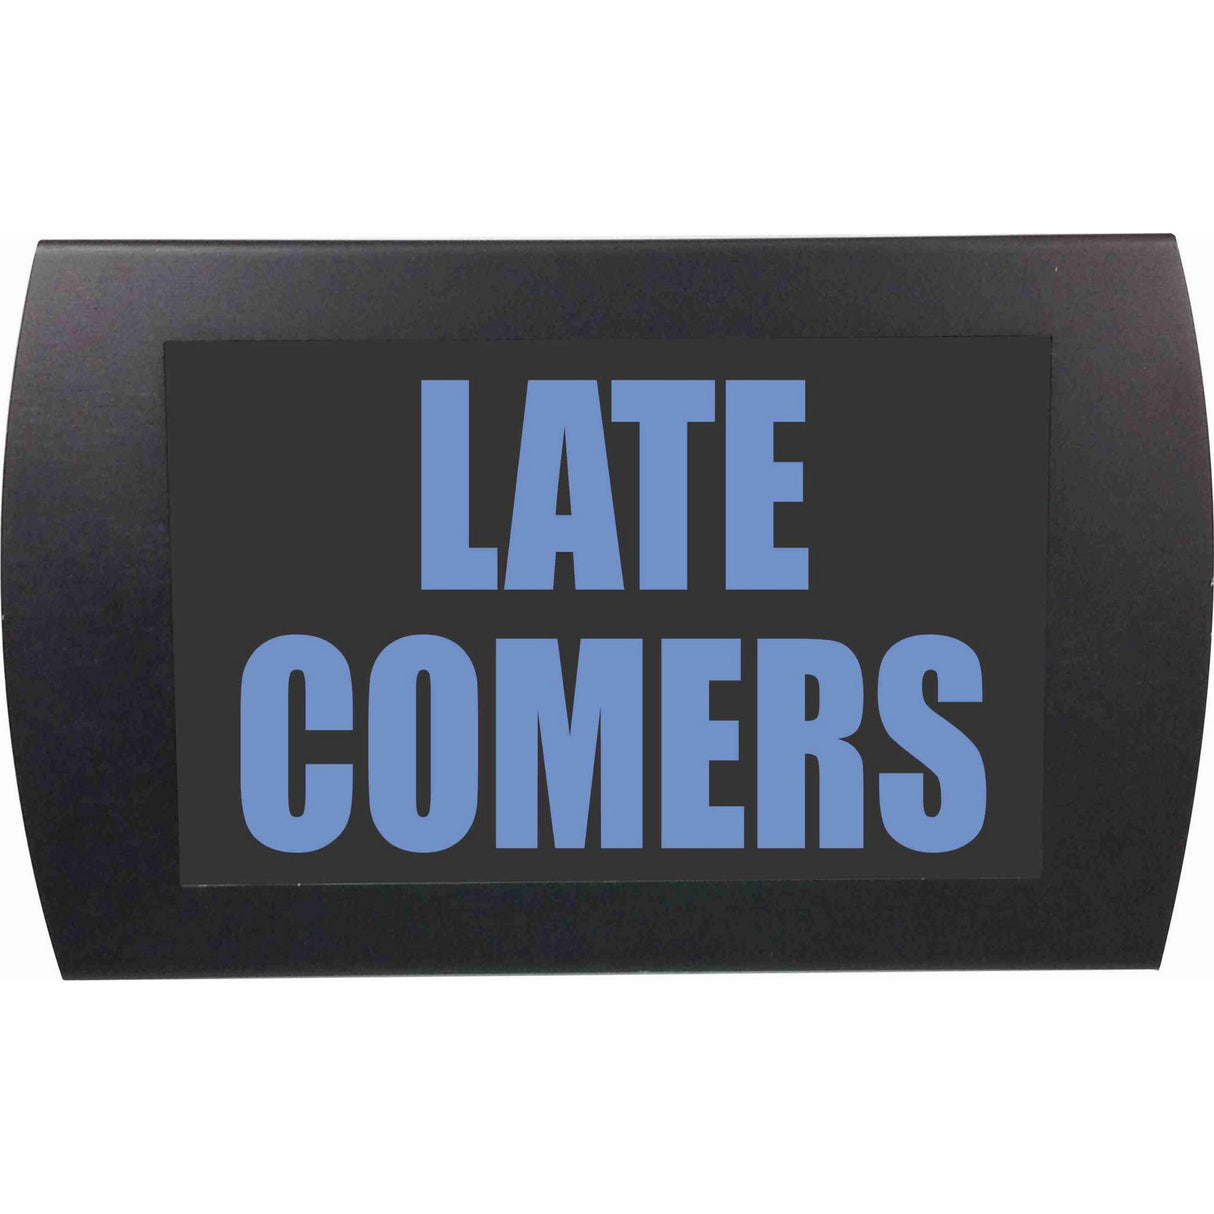 American Recorder OAS-2033M-BL "LATE COMERS" LED Lighted Sign, Blue